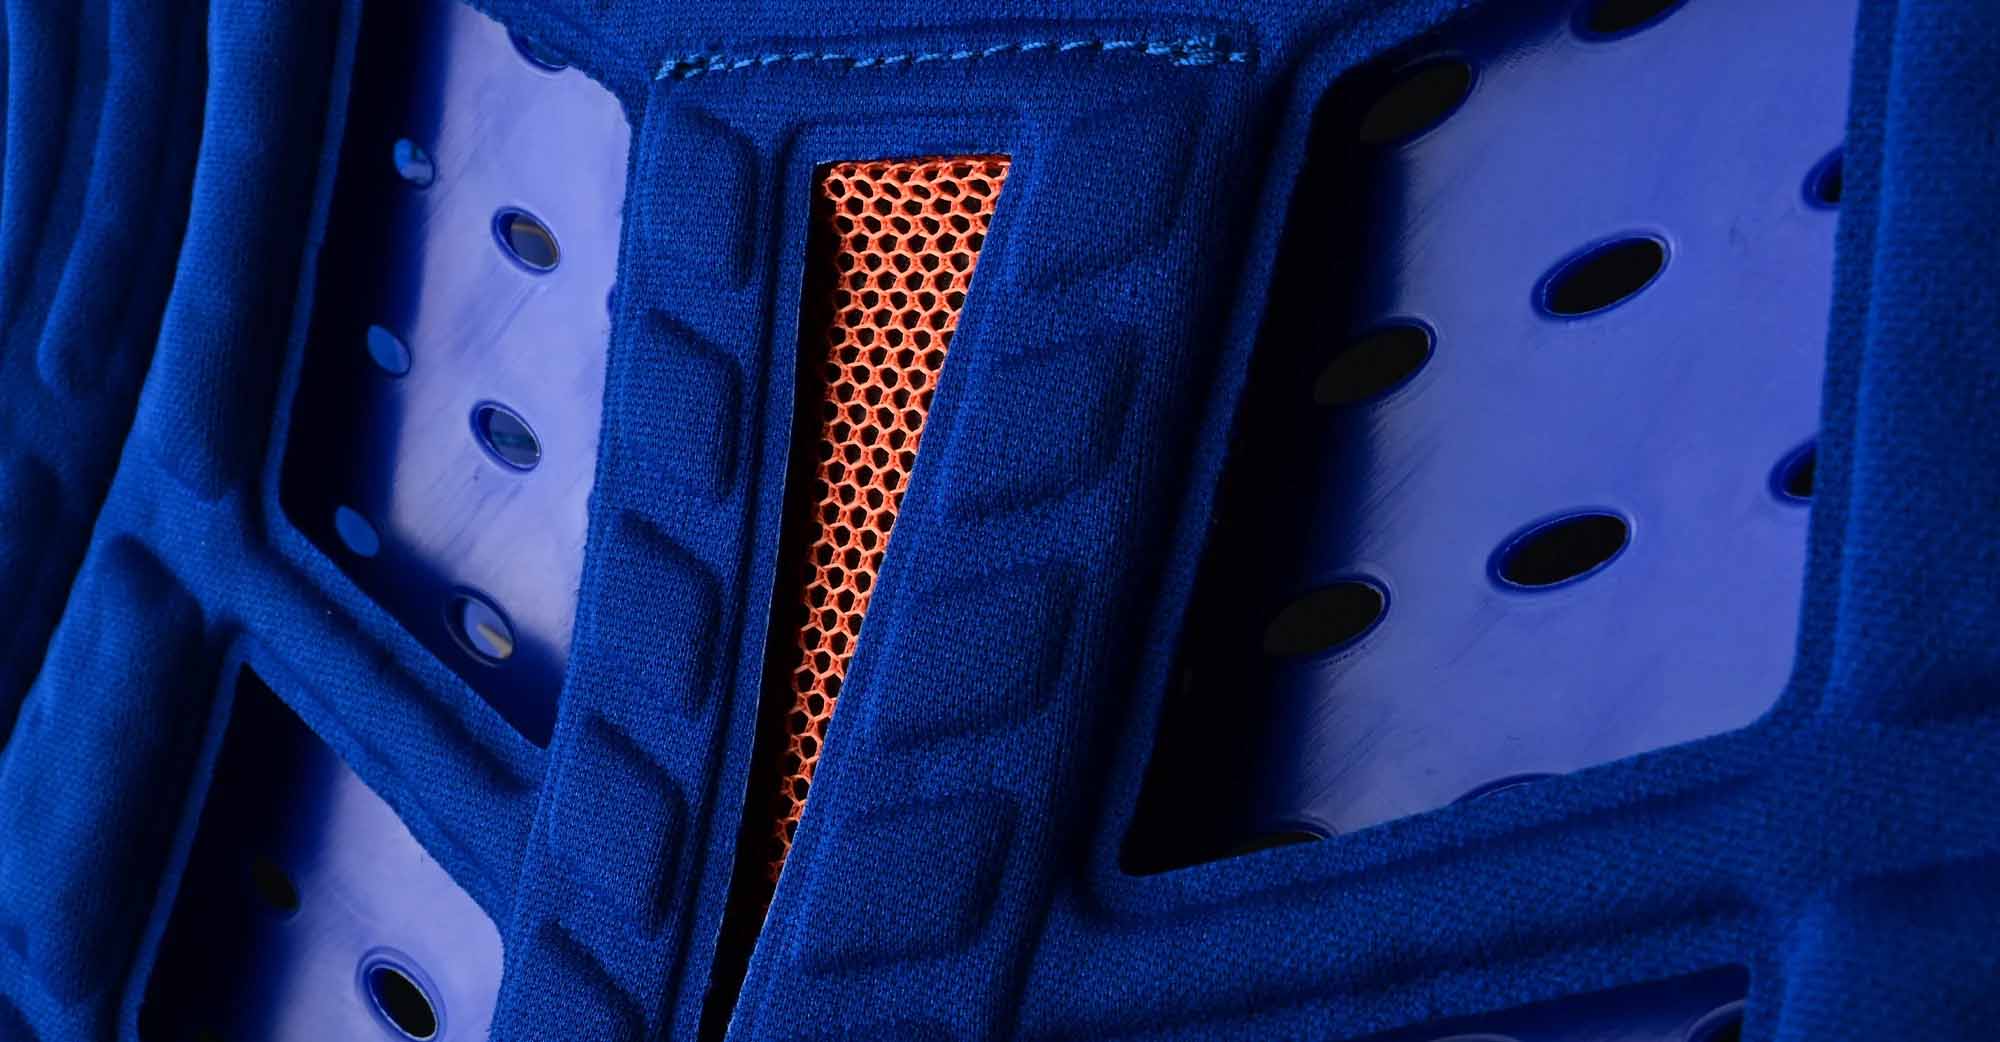 TLD - Rockfight chest protection closeup of blue chest protection